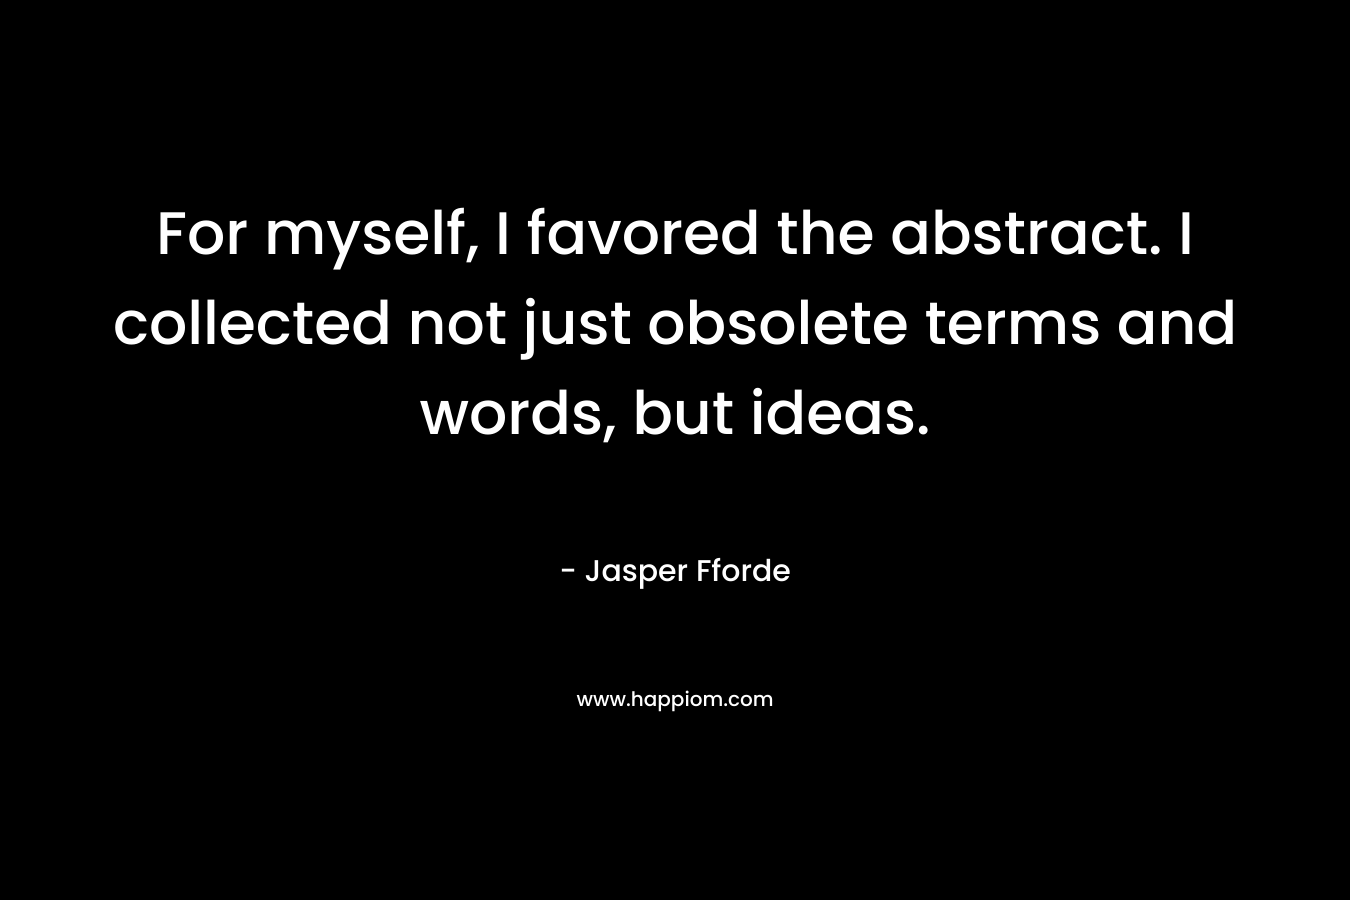 For myself, I favored the abstract. I collected not just obsolete terms and words, but ideas. – Jasper Fforde